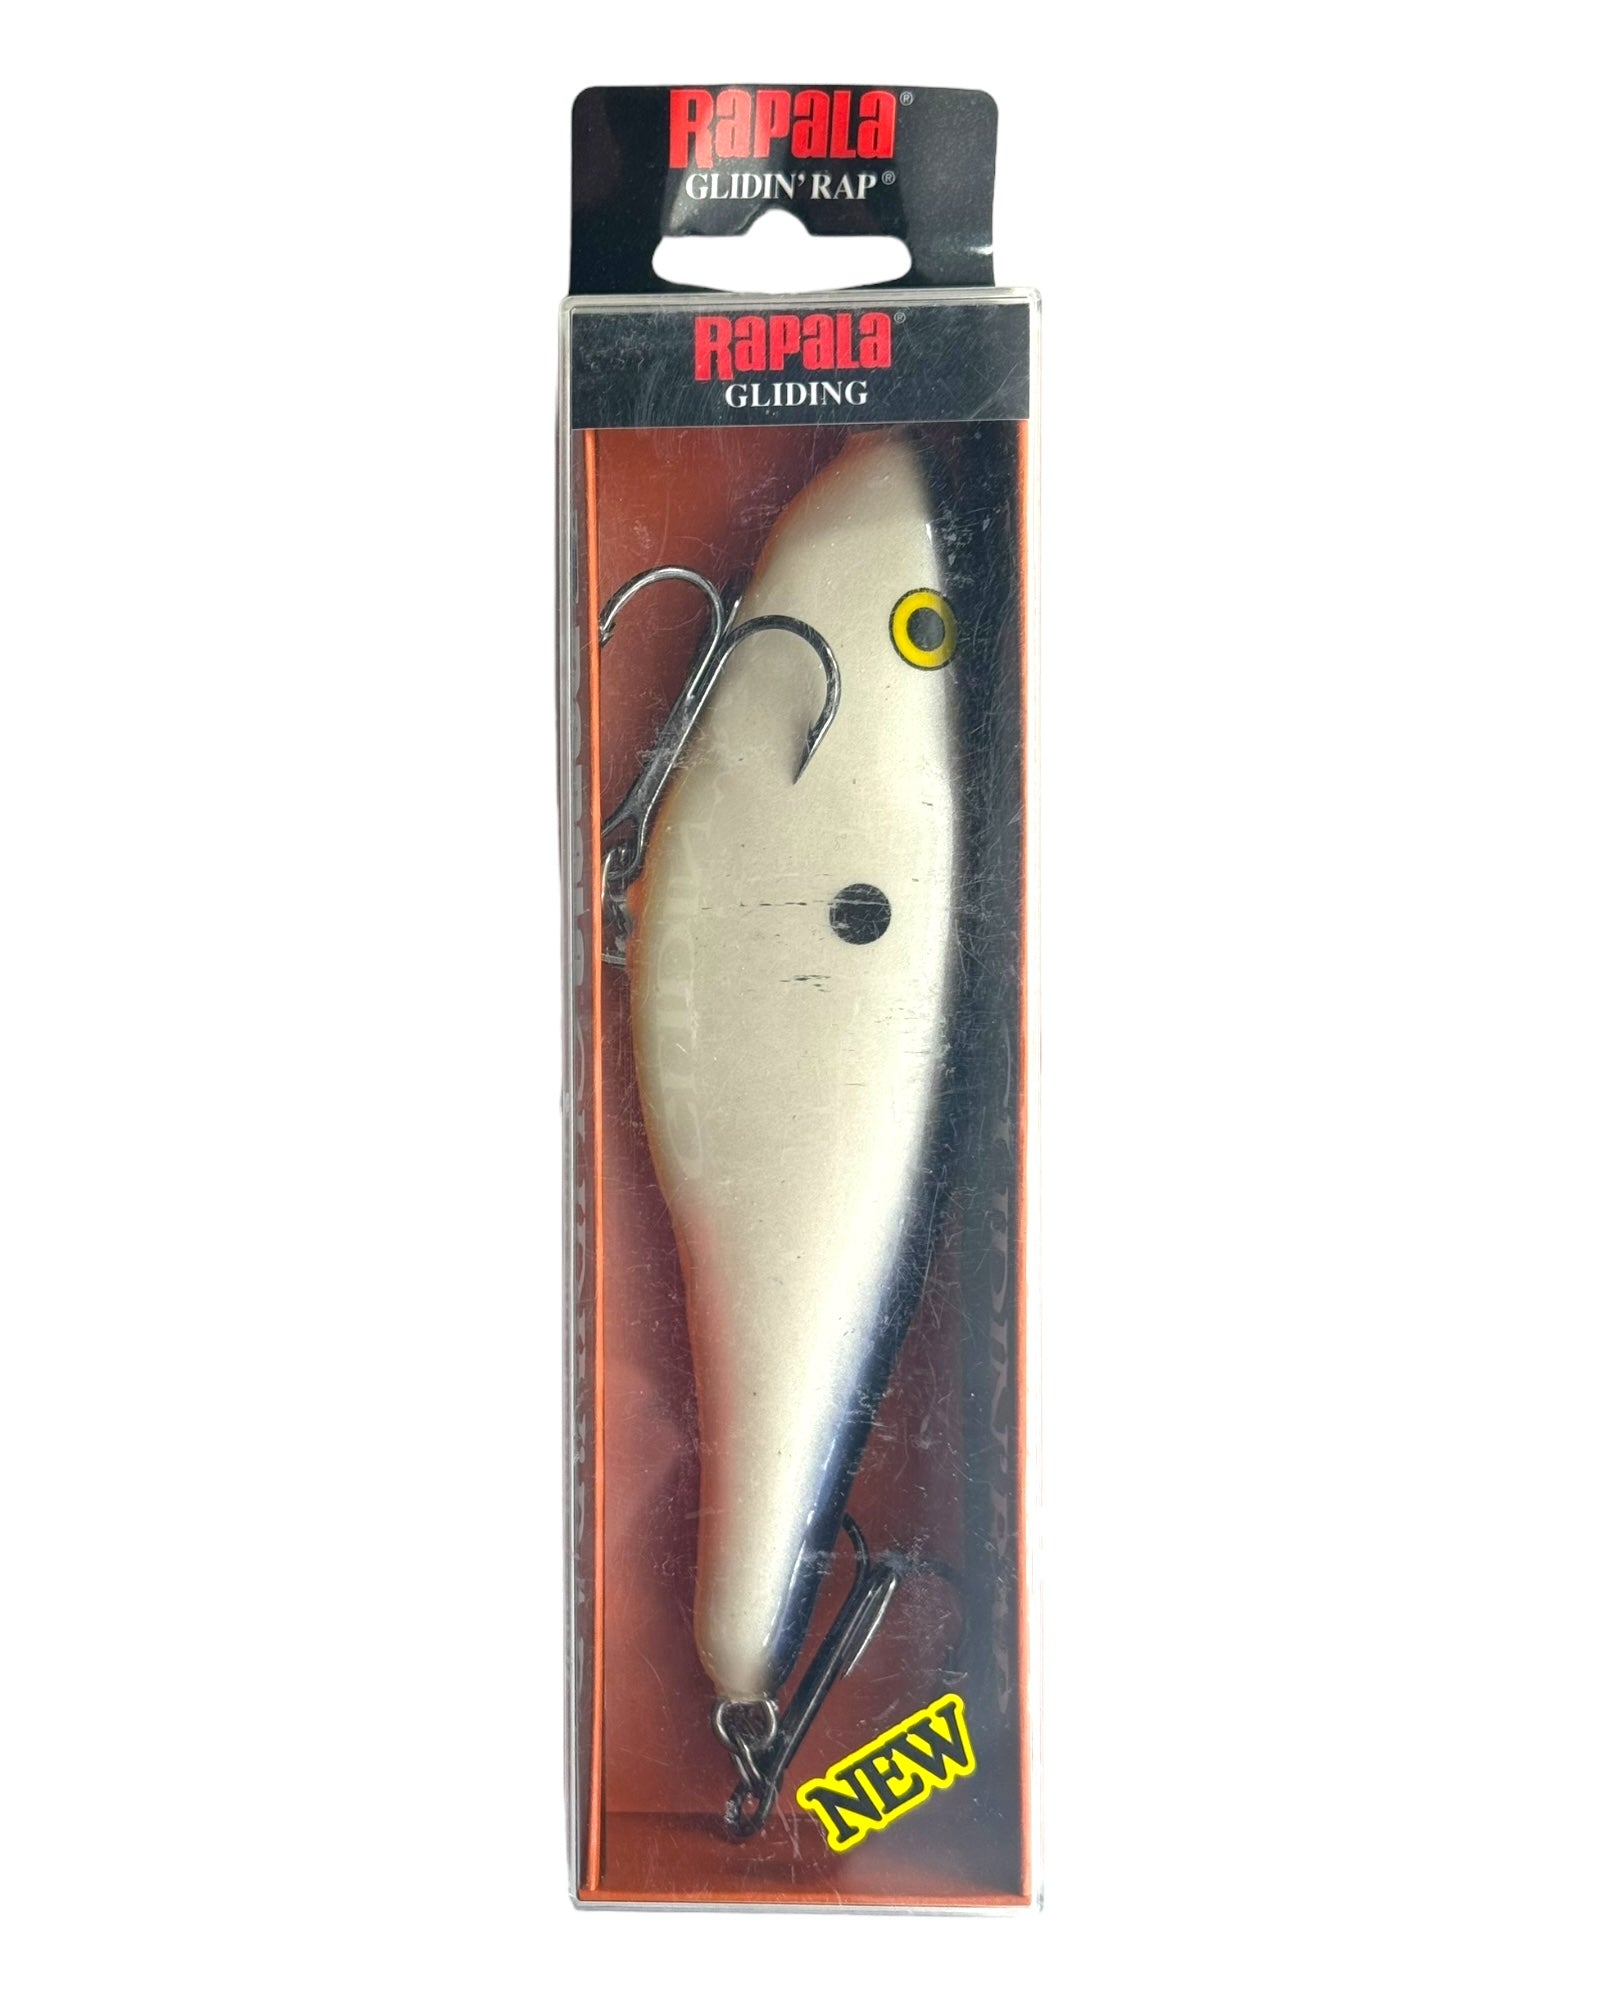 RAPALA LURES GLIDIN' RAP 15 Fishing Lure • OPSD PEARL SHAD – Toad Tackle